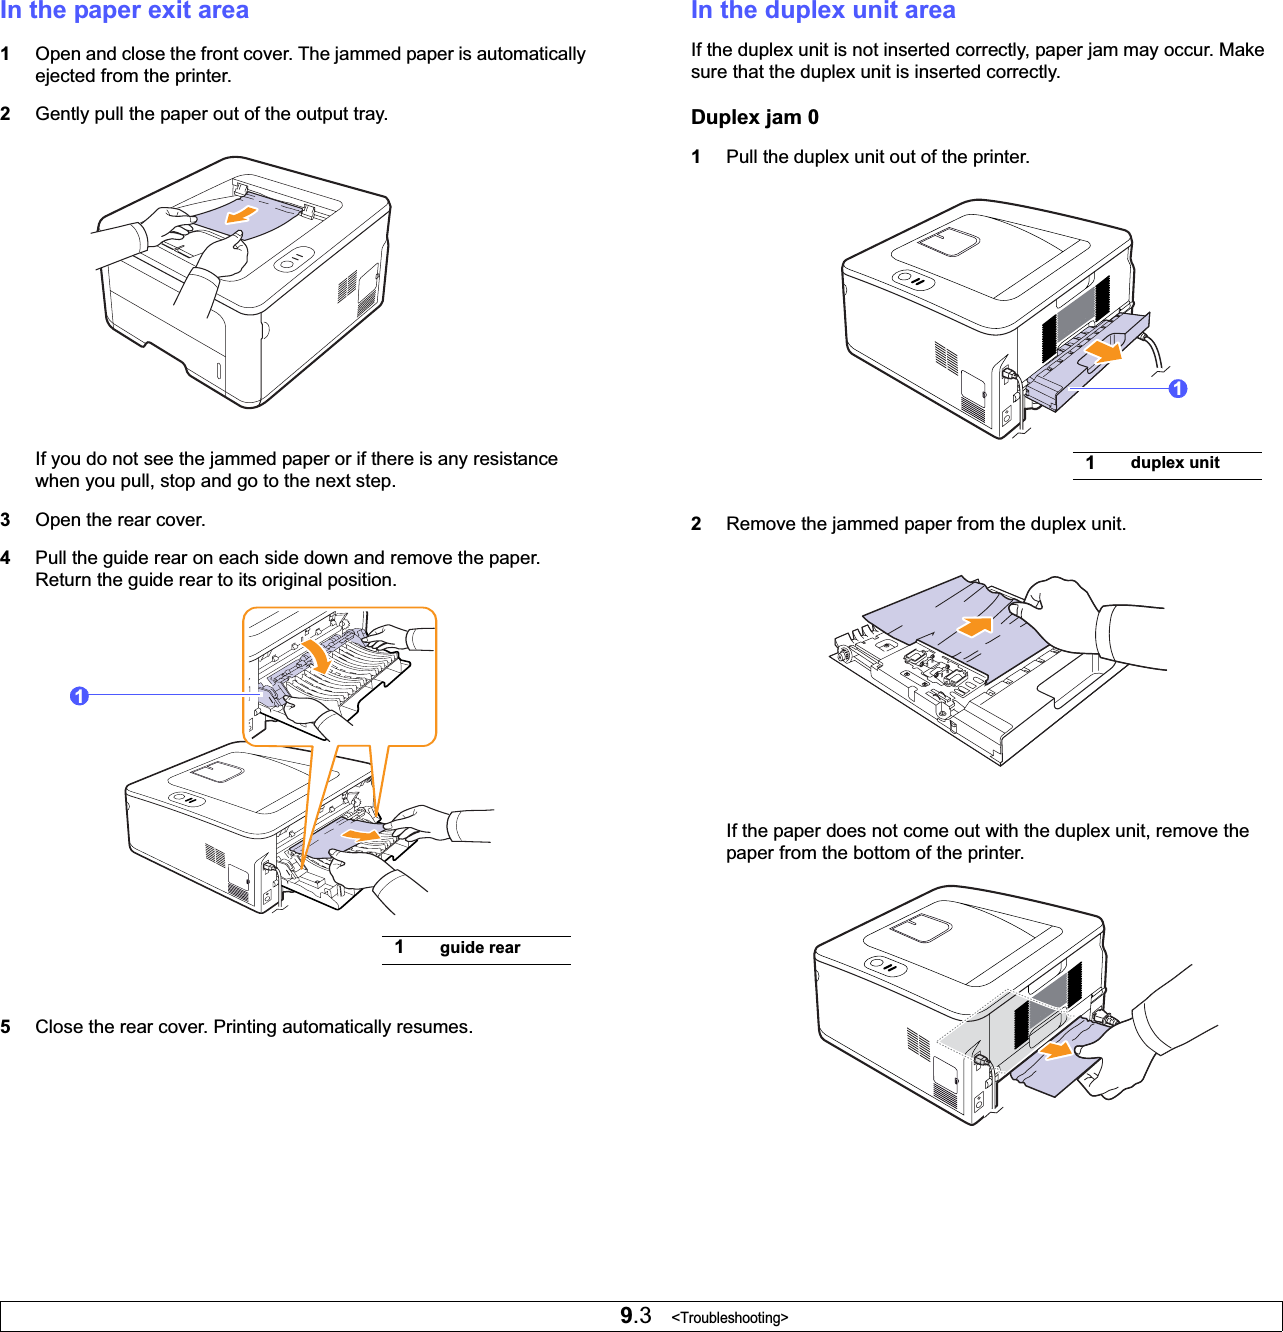 9.3   &lt;Troubleshooting&gt;In the paper exit area1Open and close the front cover. The jammed paper is automatically ejected from the printer. 2Gently pull the paper out of the output tray.If you do not see the jammed paper or if there is any resistance when you pull, stop and go to the next step.3Open the rear cover.4Pull the guide rear on each side down and remove the paper. Return the guide rear to its original position.5Close the rear cover. Printing automatically resumes.1guide rear1In the duplex unit areaIf the duplex unit is not inserted correctly, paper jam may occur. Make sure that the duplex unit is inserted correctly.Duplex jam 01Pull the duplex unit out of the printer.2Remove the jammed paper from the duplex unit.If the paper does not come out with the duplex unit, remove the paper from the bottom of the printer.1duplex unit1